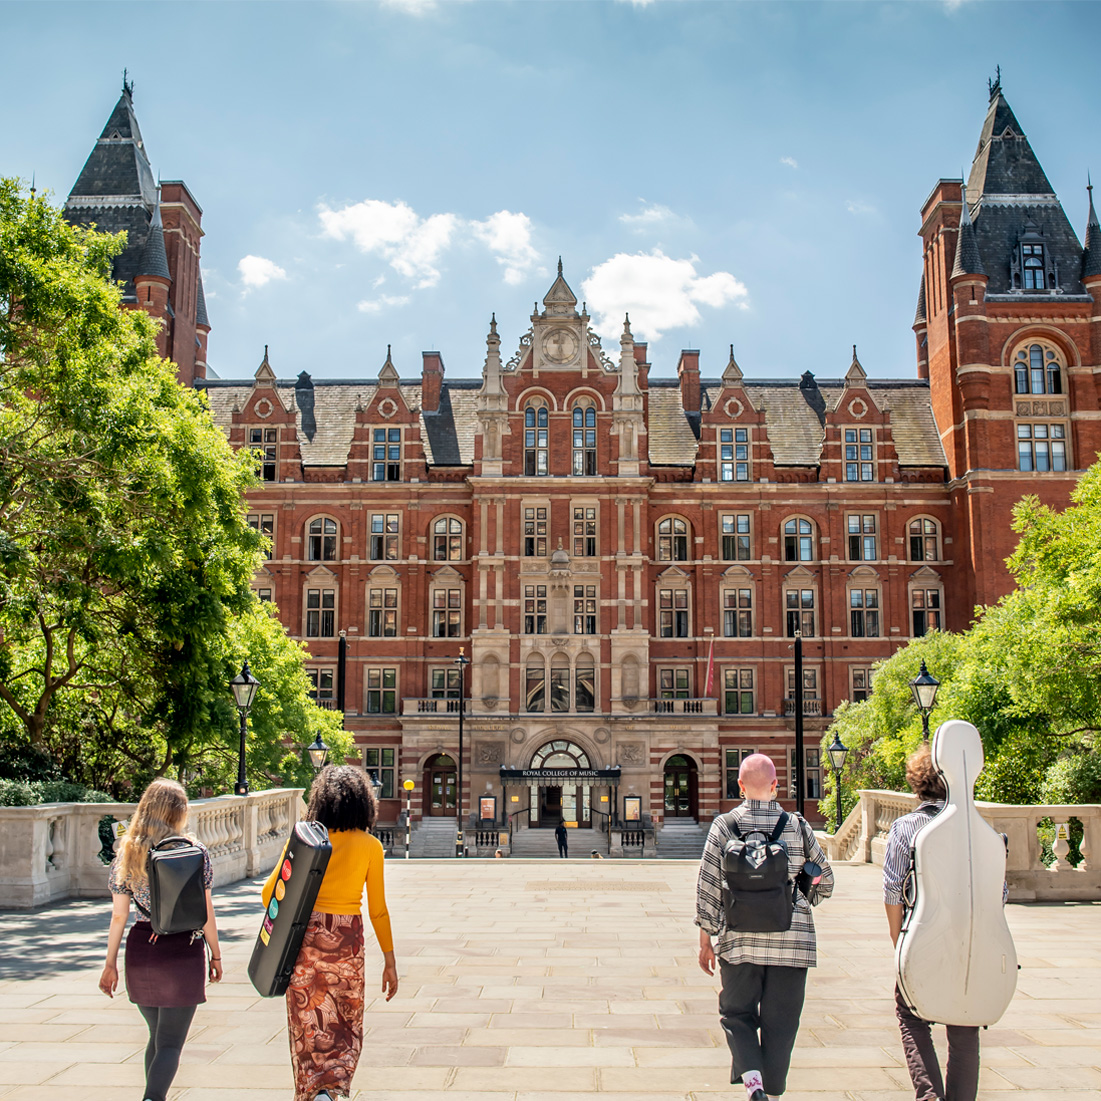 A group of students wearing casual clothes, walking towards the front entrance of the Royal College of Music, an old, red brick, Victorian building, in the background.